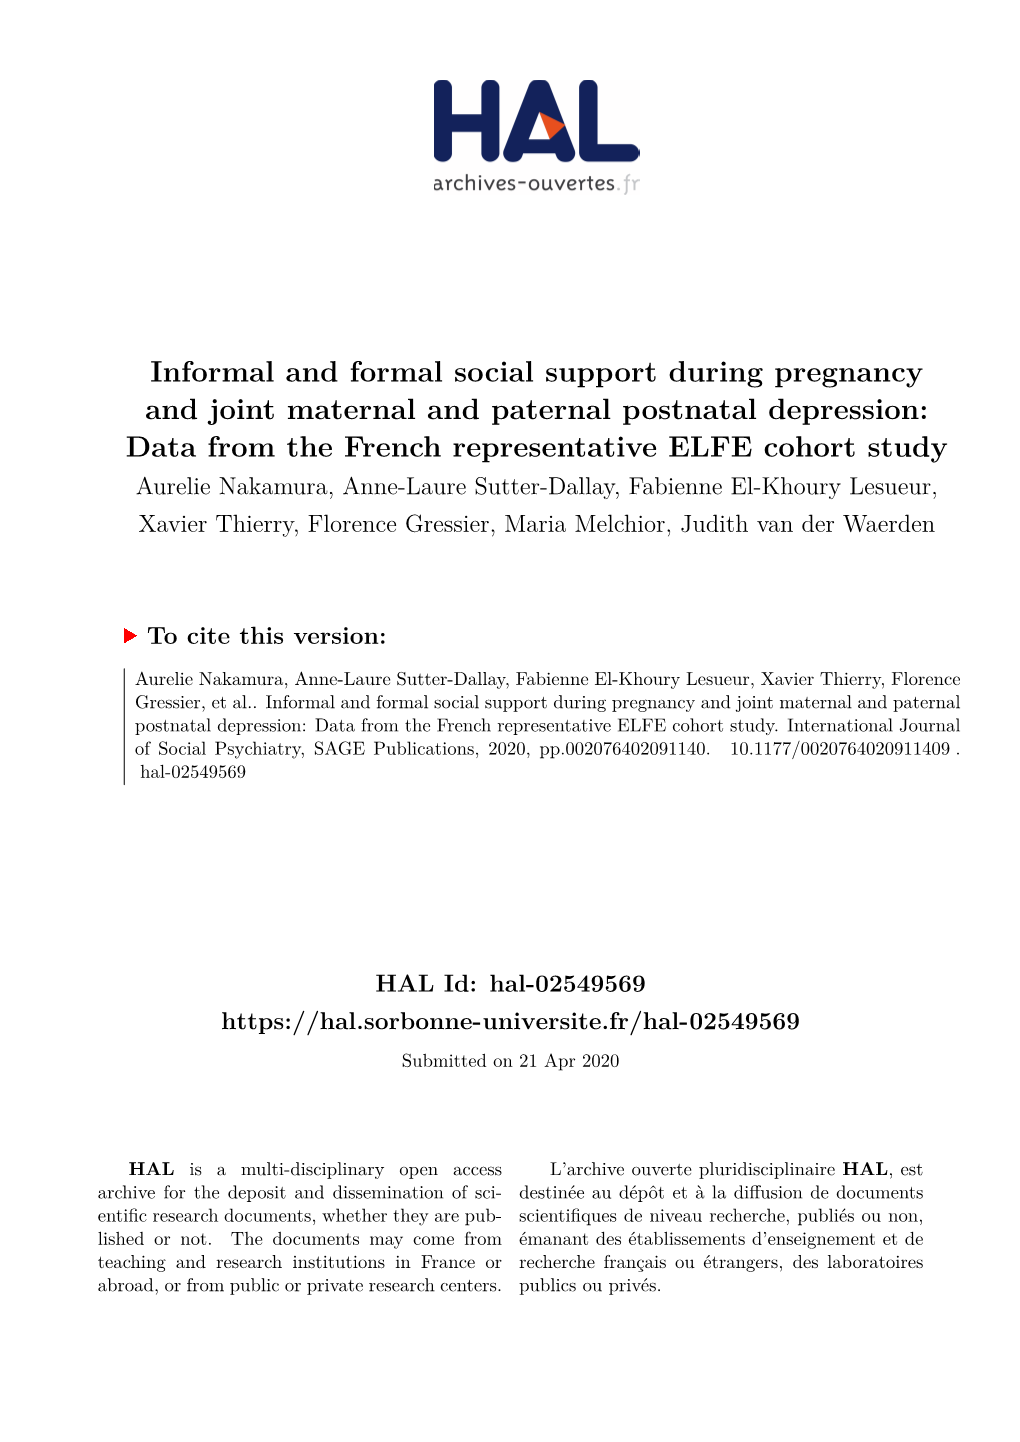 Informal and Formal Social Support During Pregnancy and Joint Maternal and Paternal Postnatal Depression